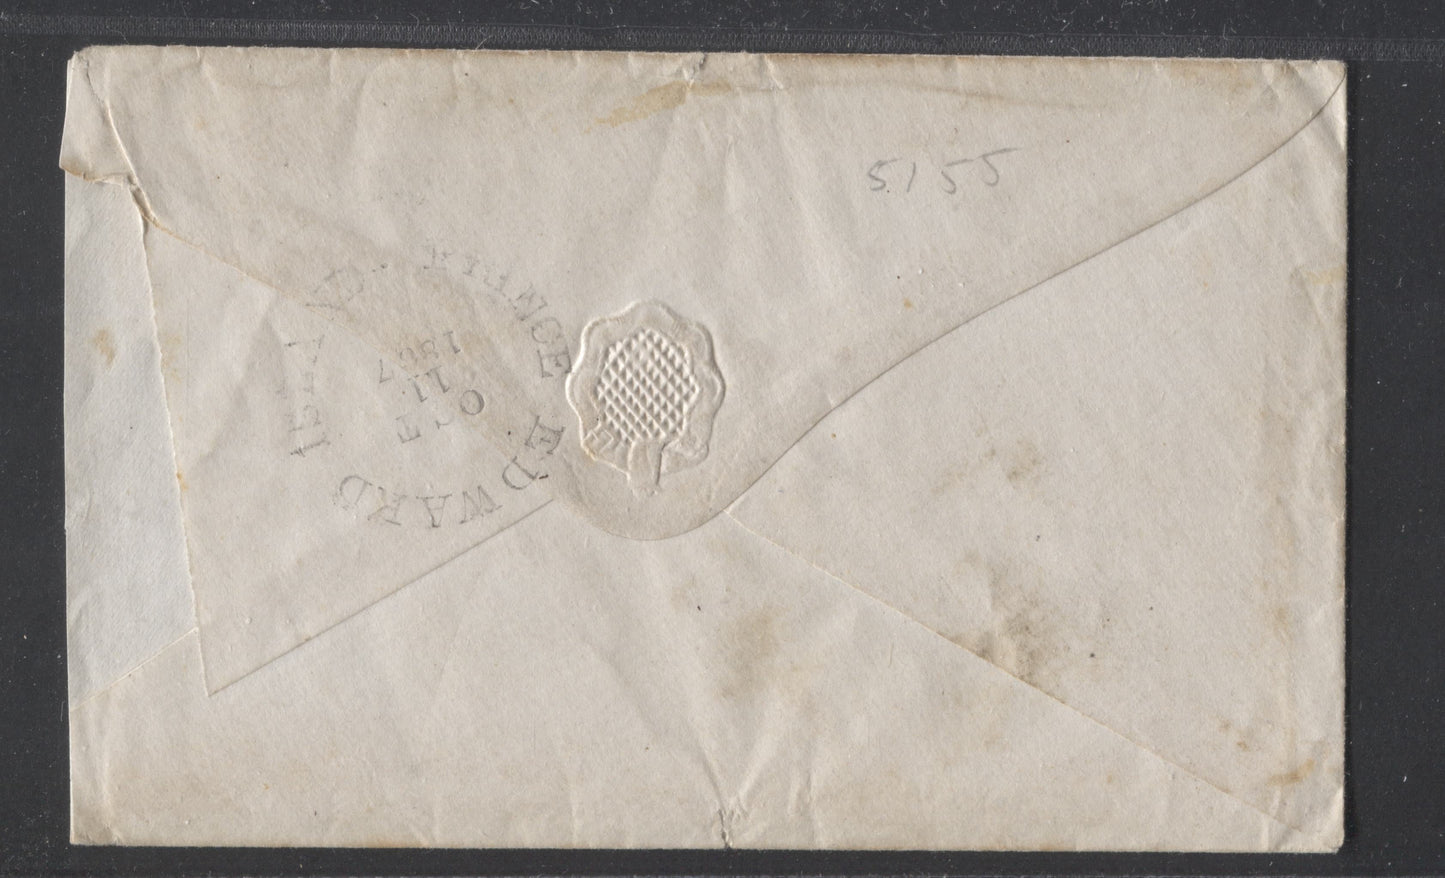 Lot 9 Prince Edward Island #5 2d Rose Perf. 11.75 Die 1 Single Usage on October 11, 1867 Cover to Neil Campbell, Landowner in Point Prim, Belfast